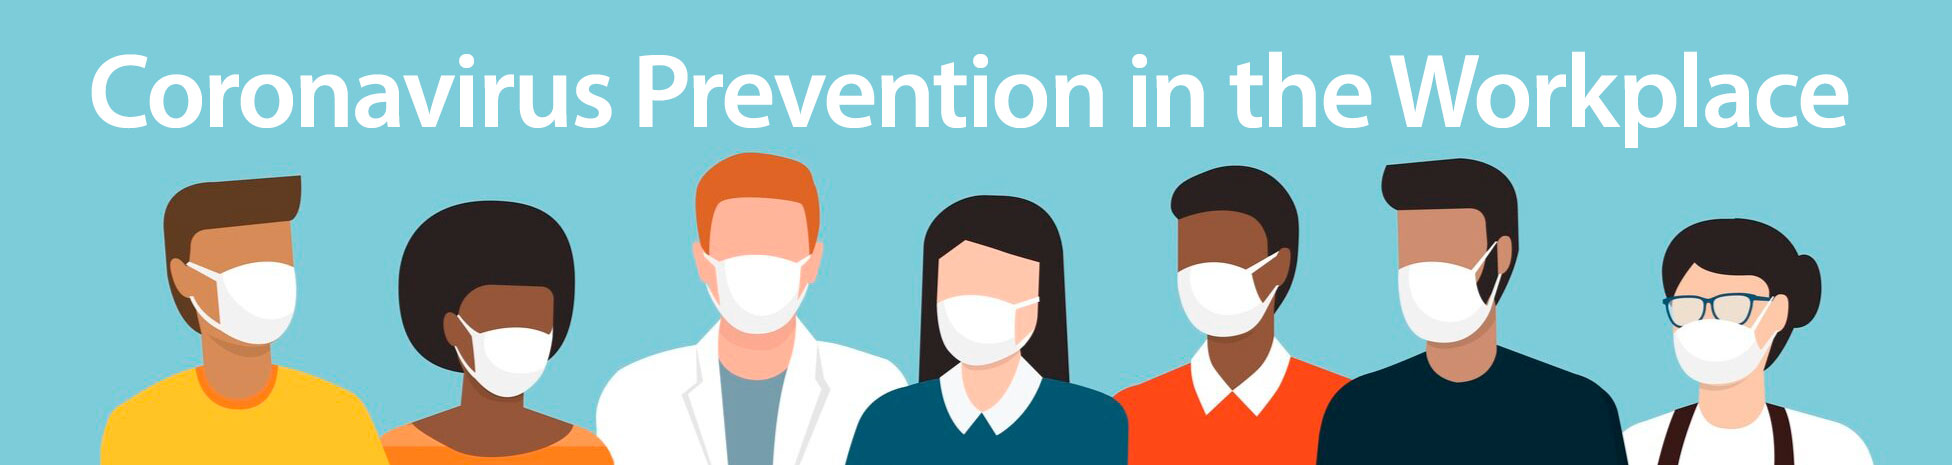 Coronavirus_Prevention_in_the_Workplace_Blog